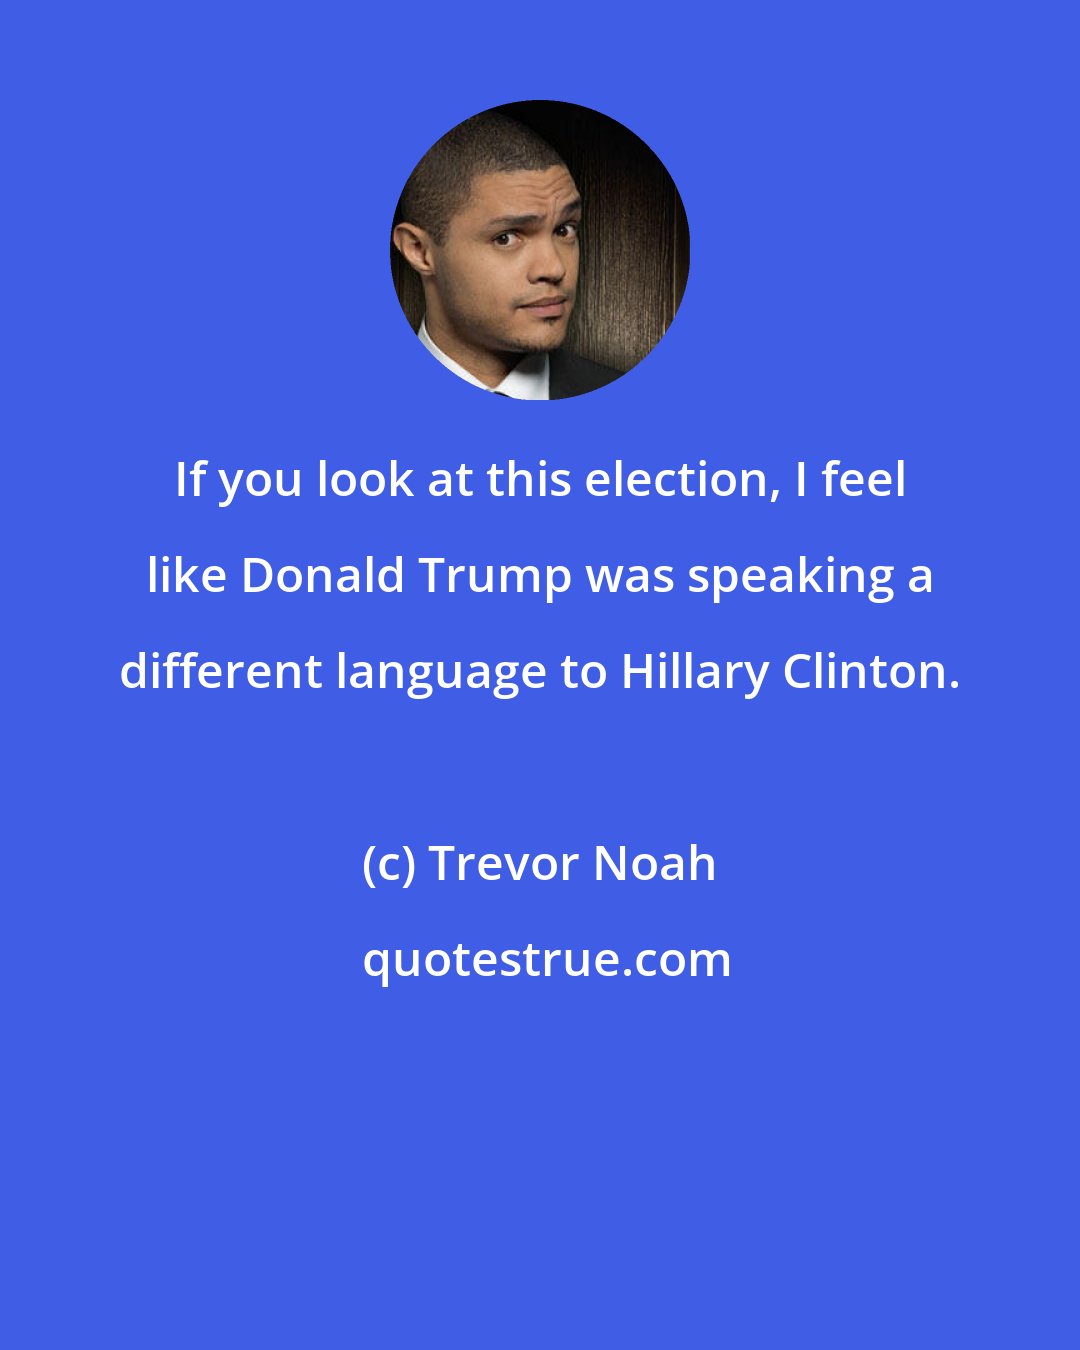 Trevor Noah: If you look at this election, I feel like Donald Trump was speaking a different language to Hillary Clinton.